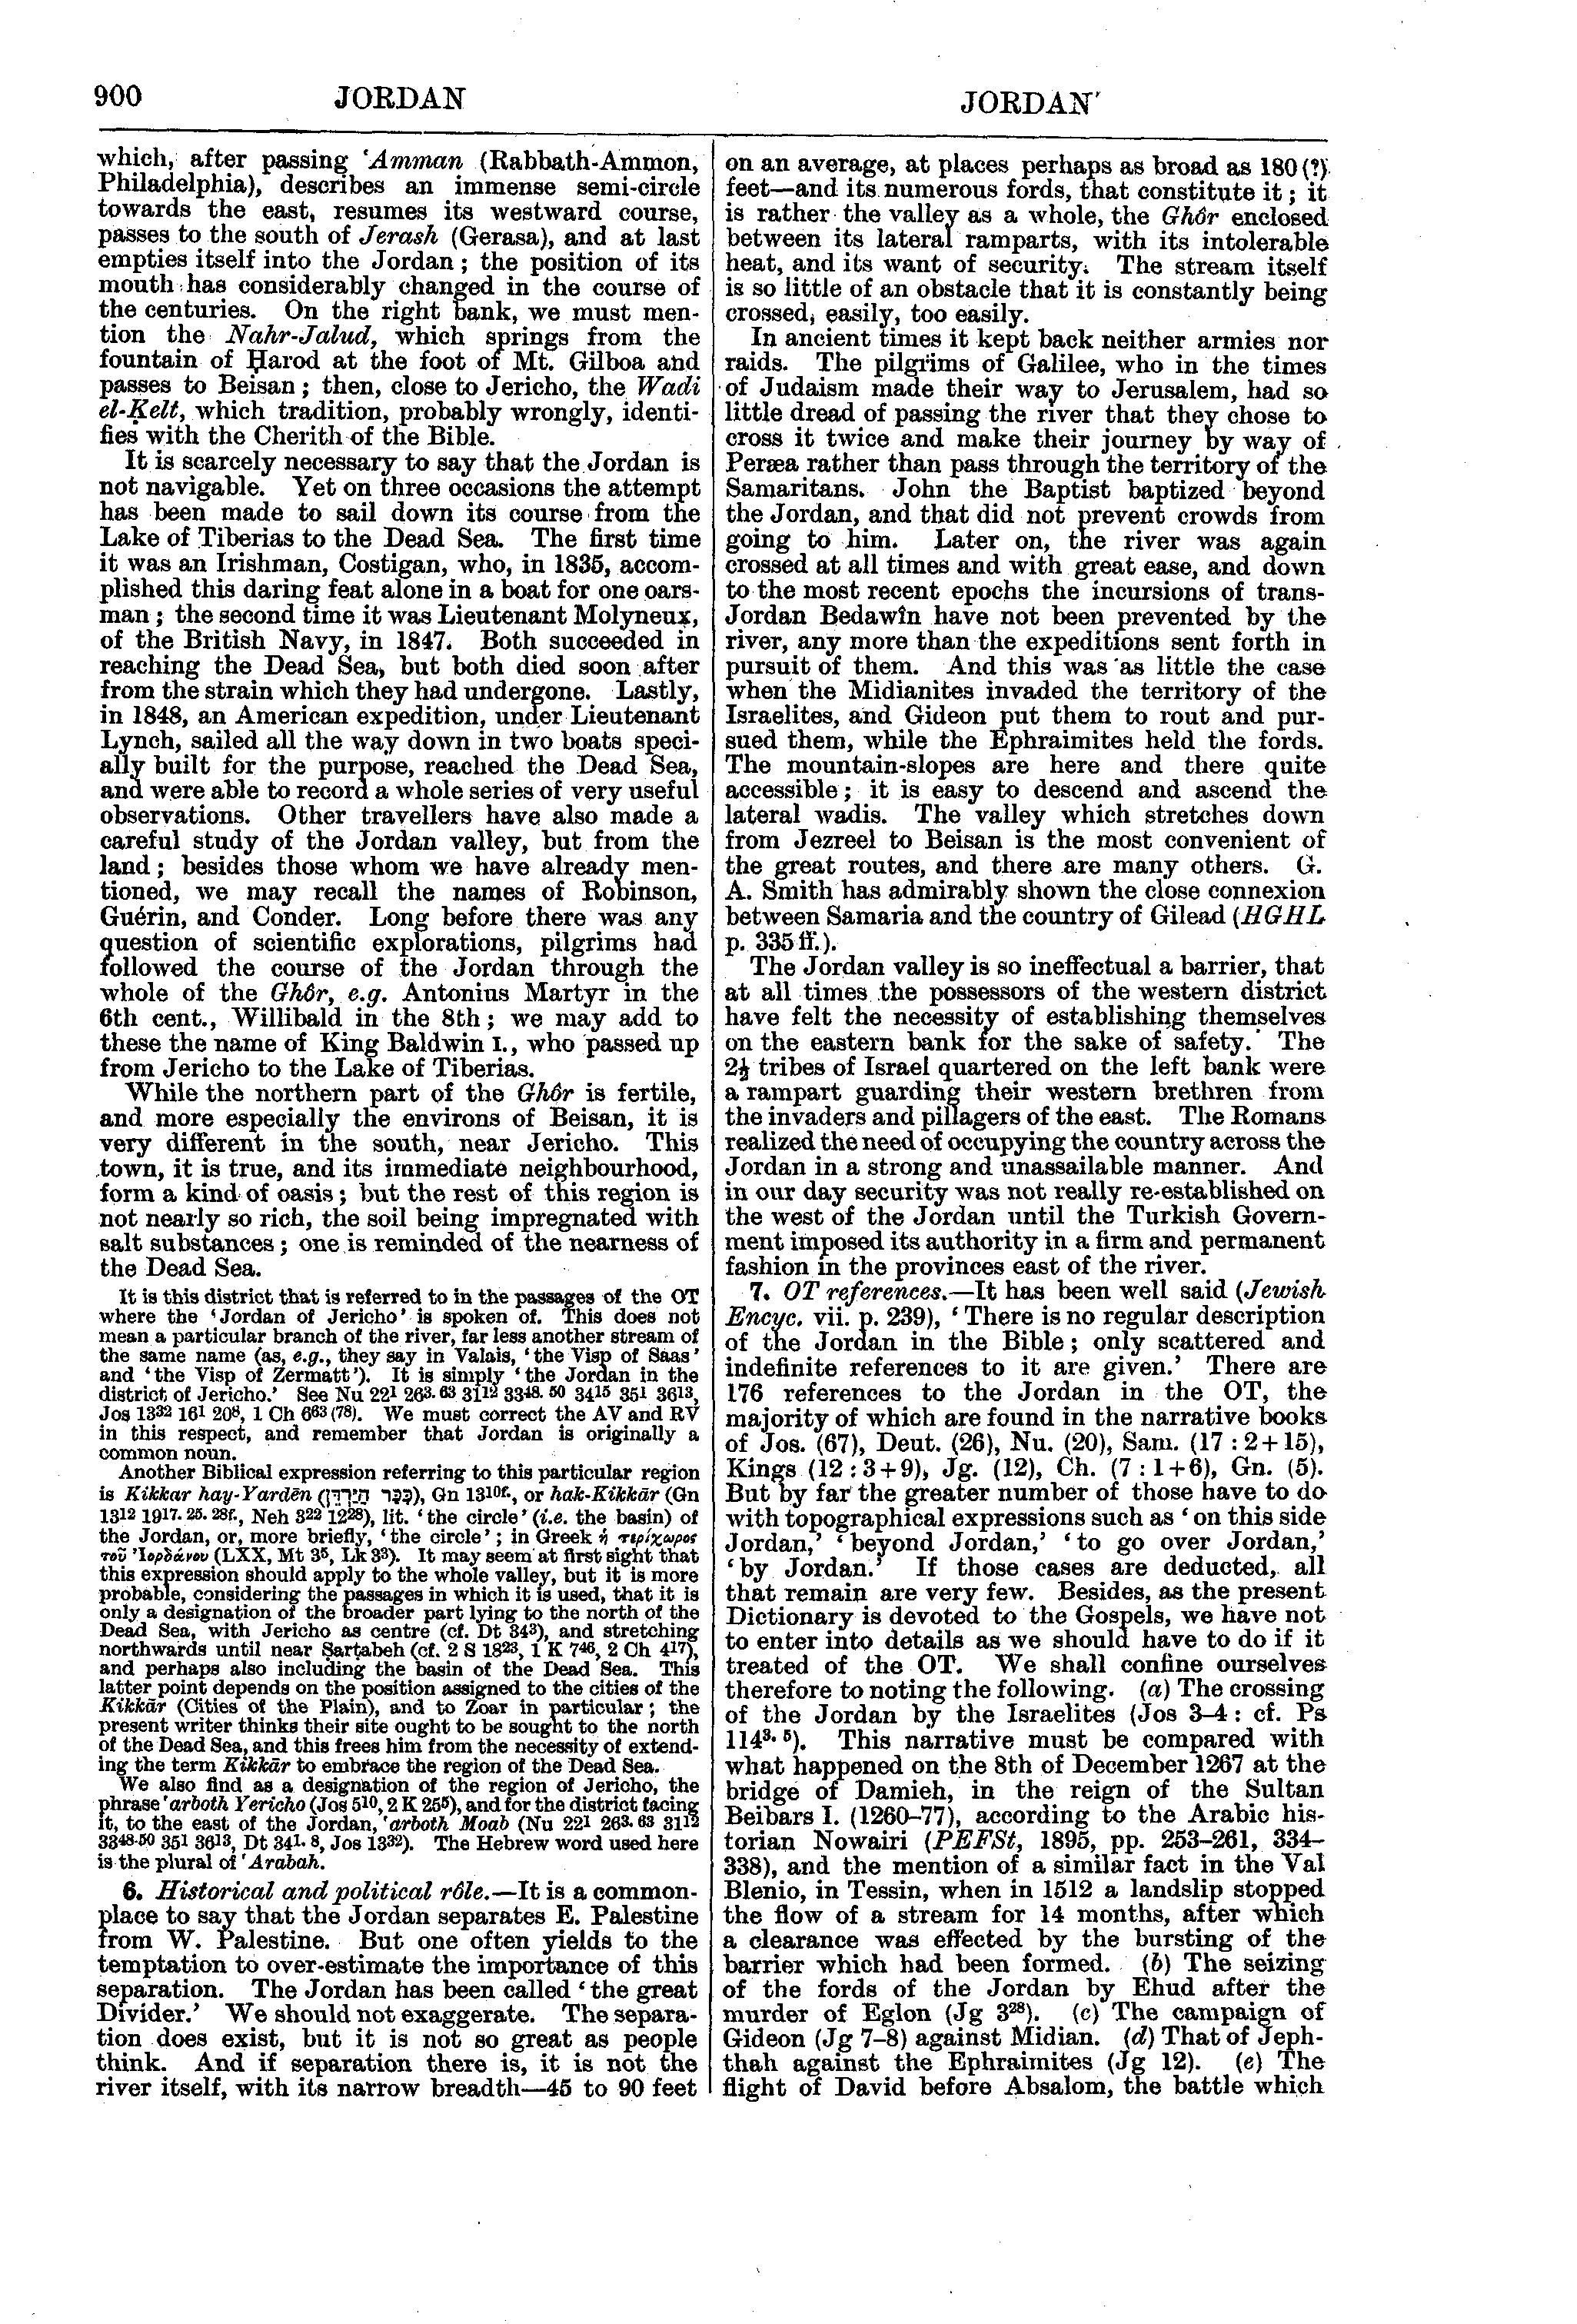 Image of page 900